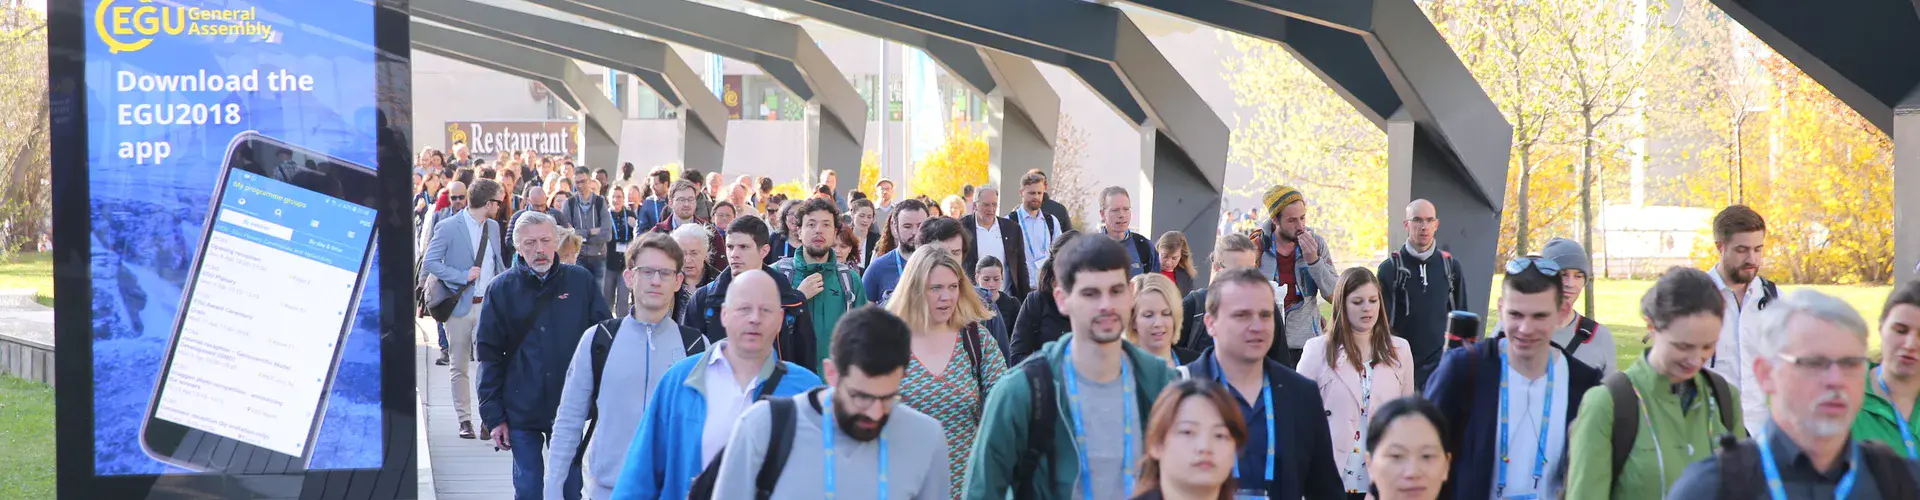 Participants arriving at the ACV during the EGU General Assembly 2018 (Credit: EGU/Foto Pfluegl)